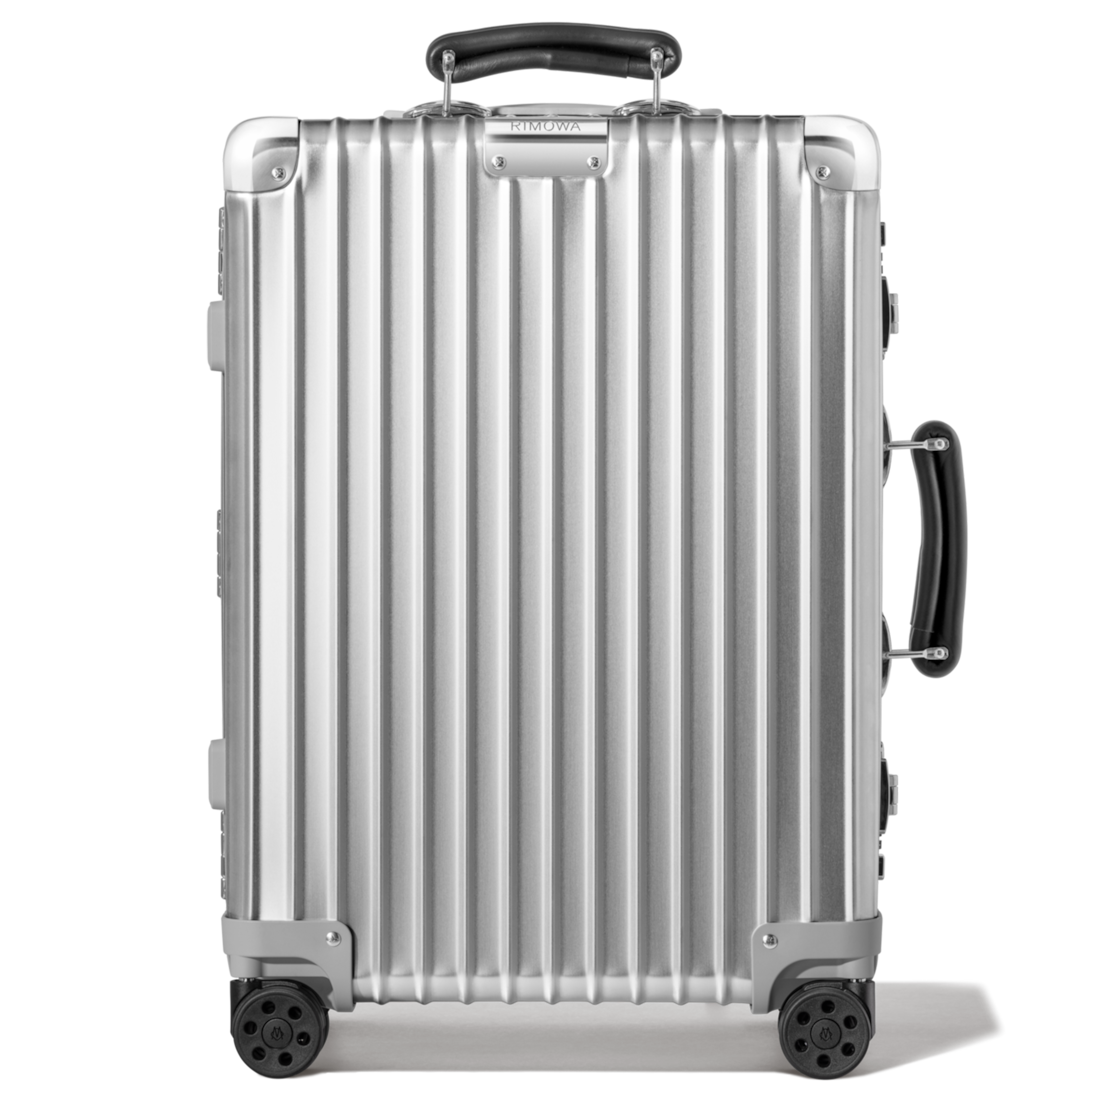 Rimowa Classic Cabin S Carry-on Suitcase In Silver - Aluminium - 21.7x15.8x7.9 - Customisable Luggage